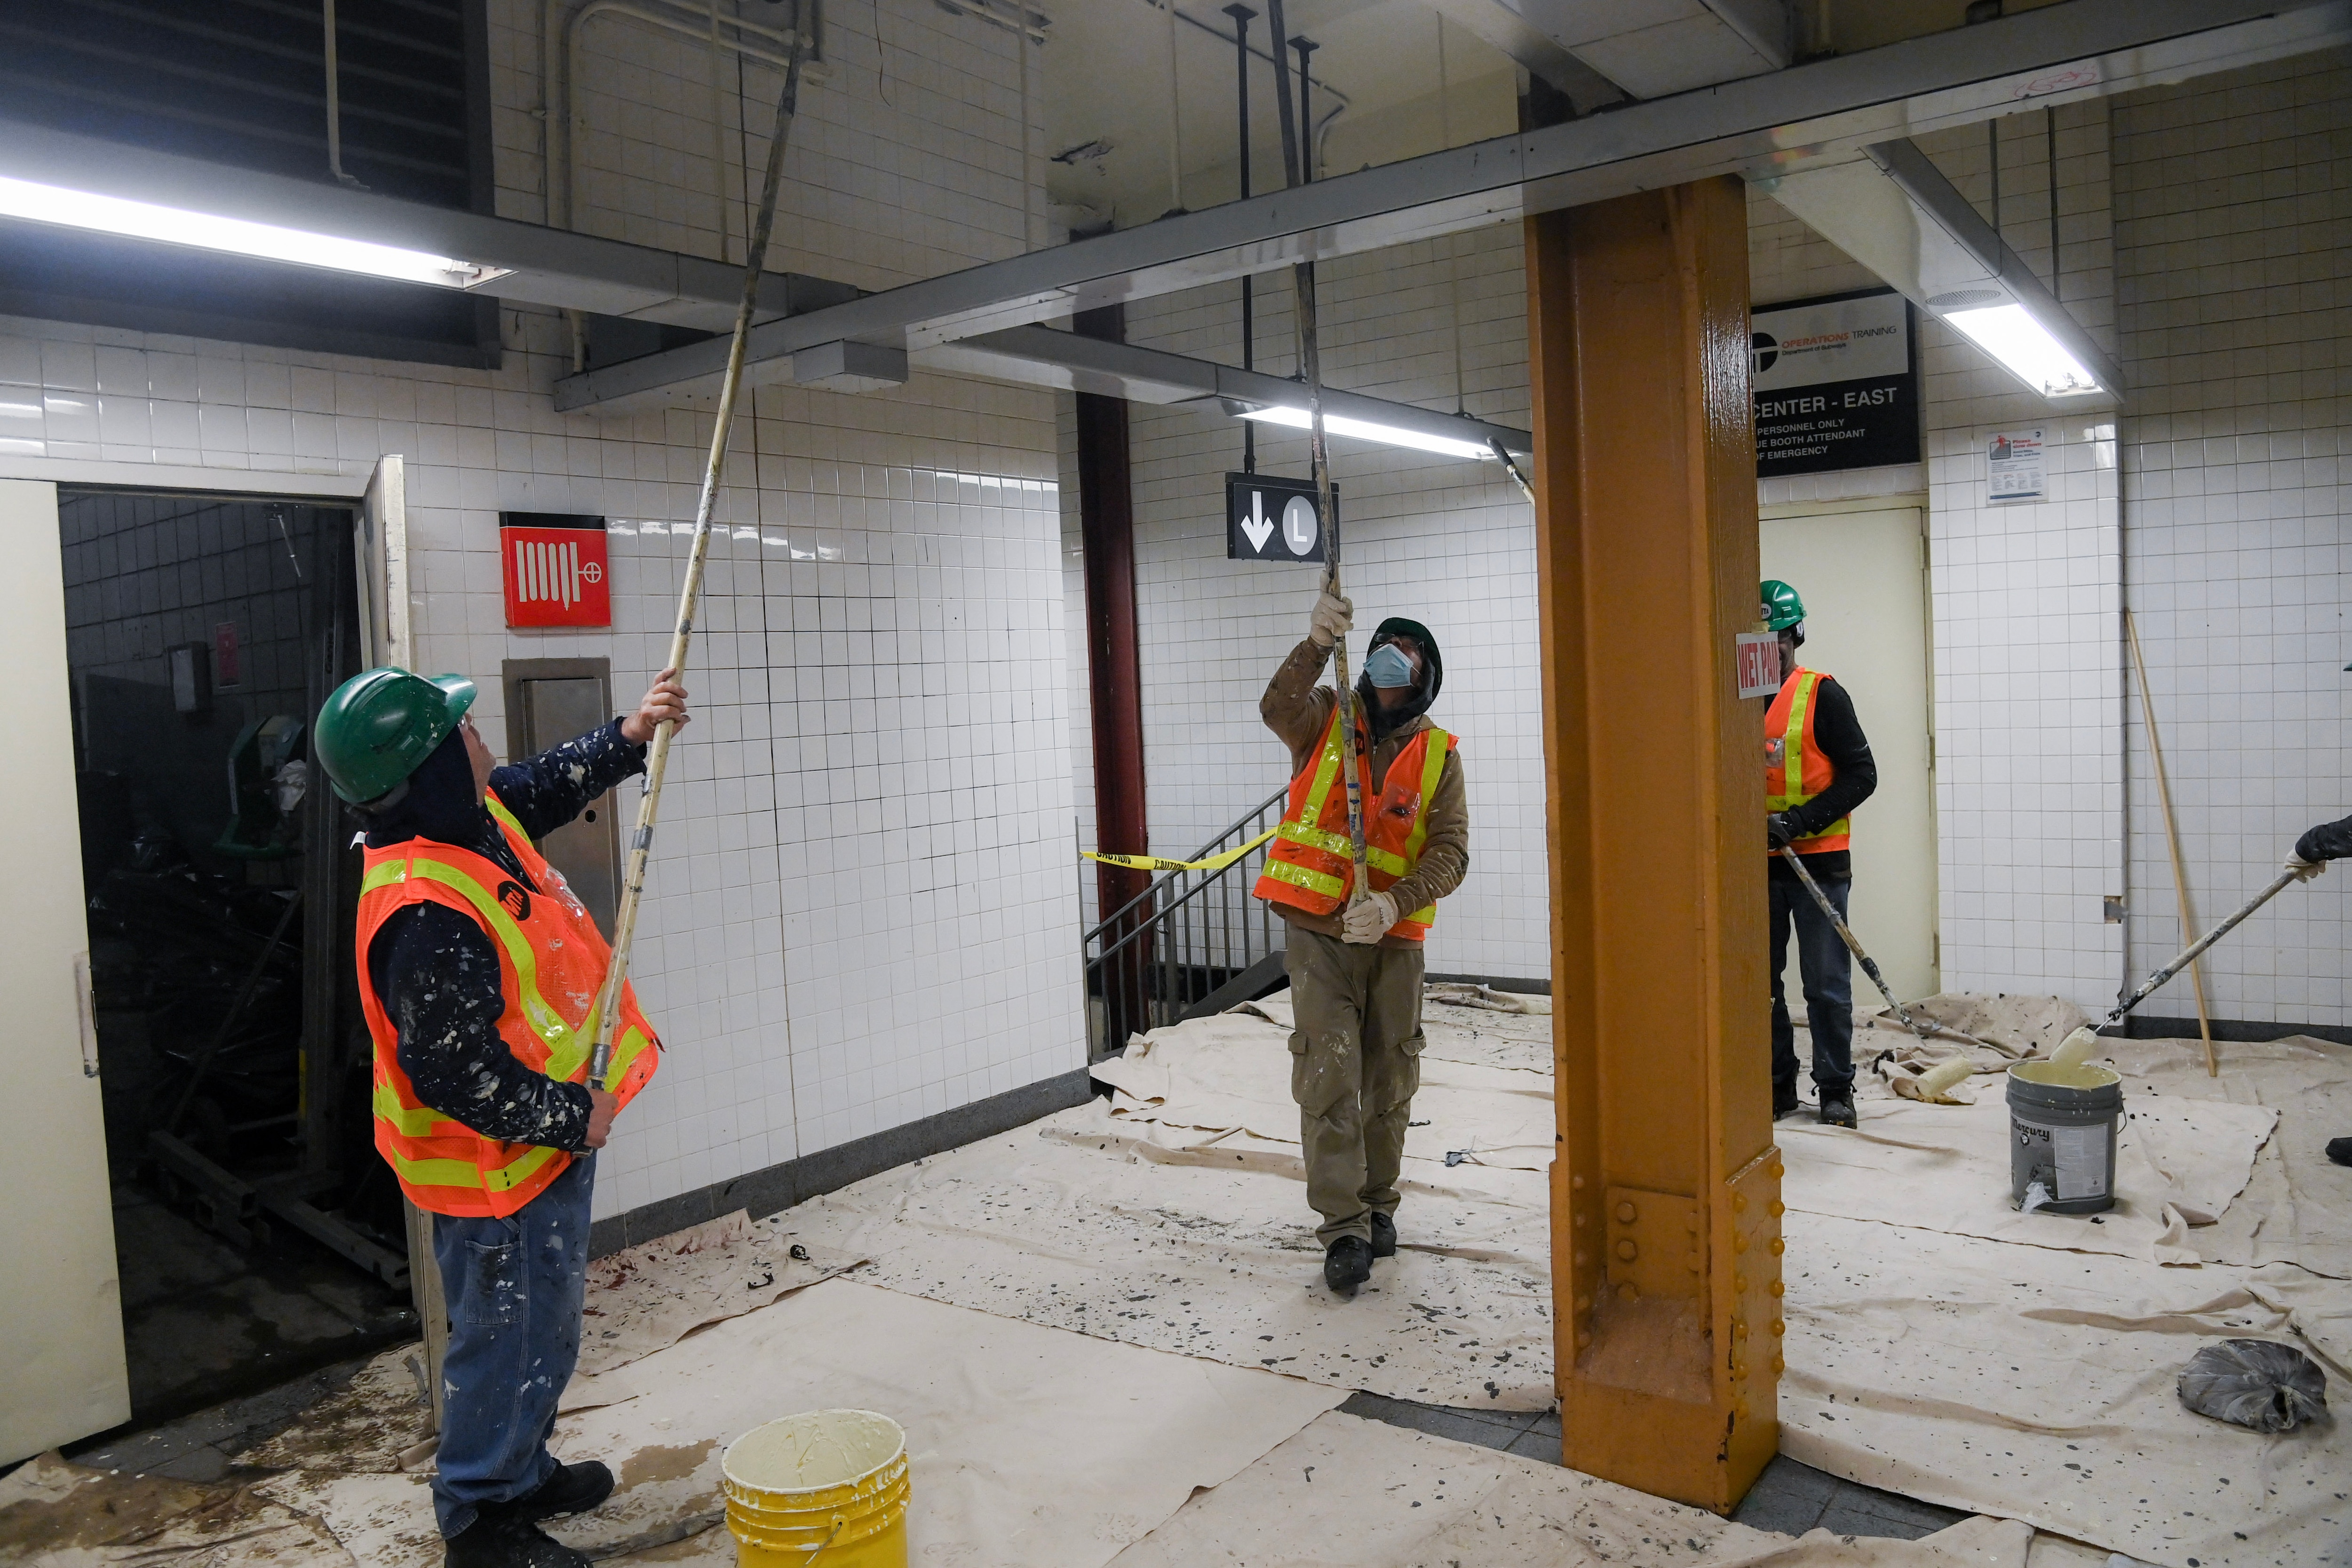 crews painting the ceiling of a subway station as part of the reNEWvation program